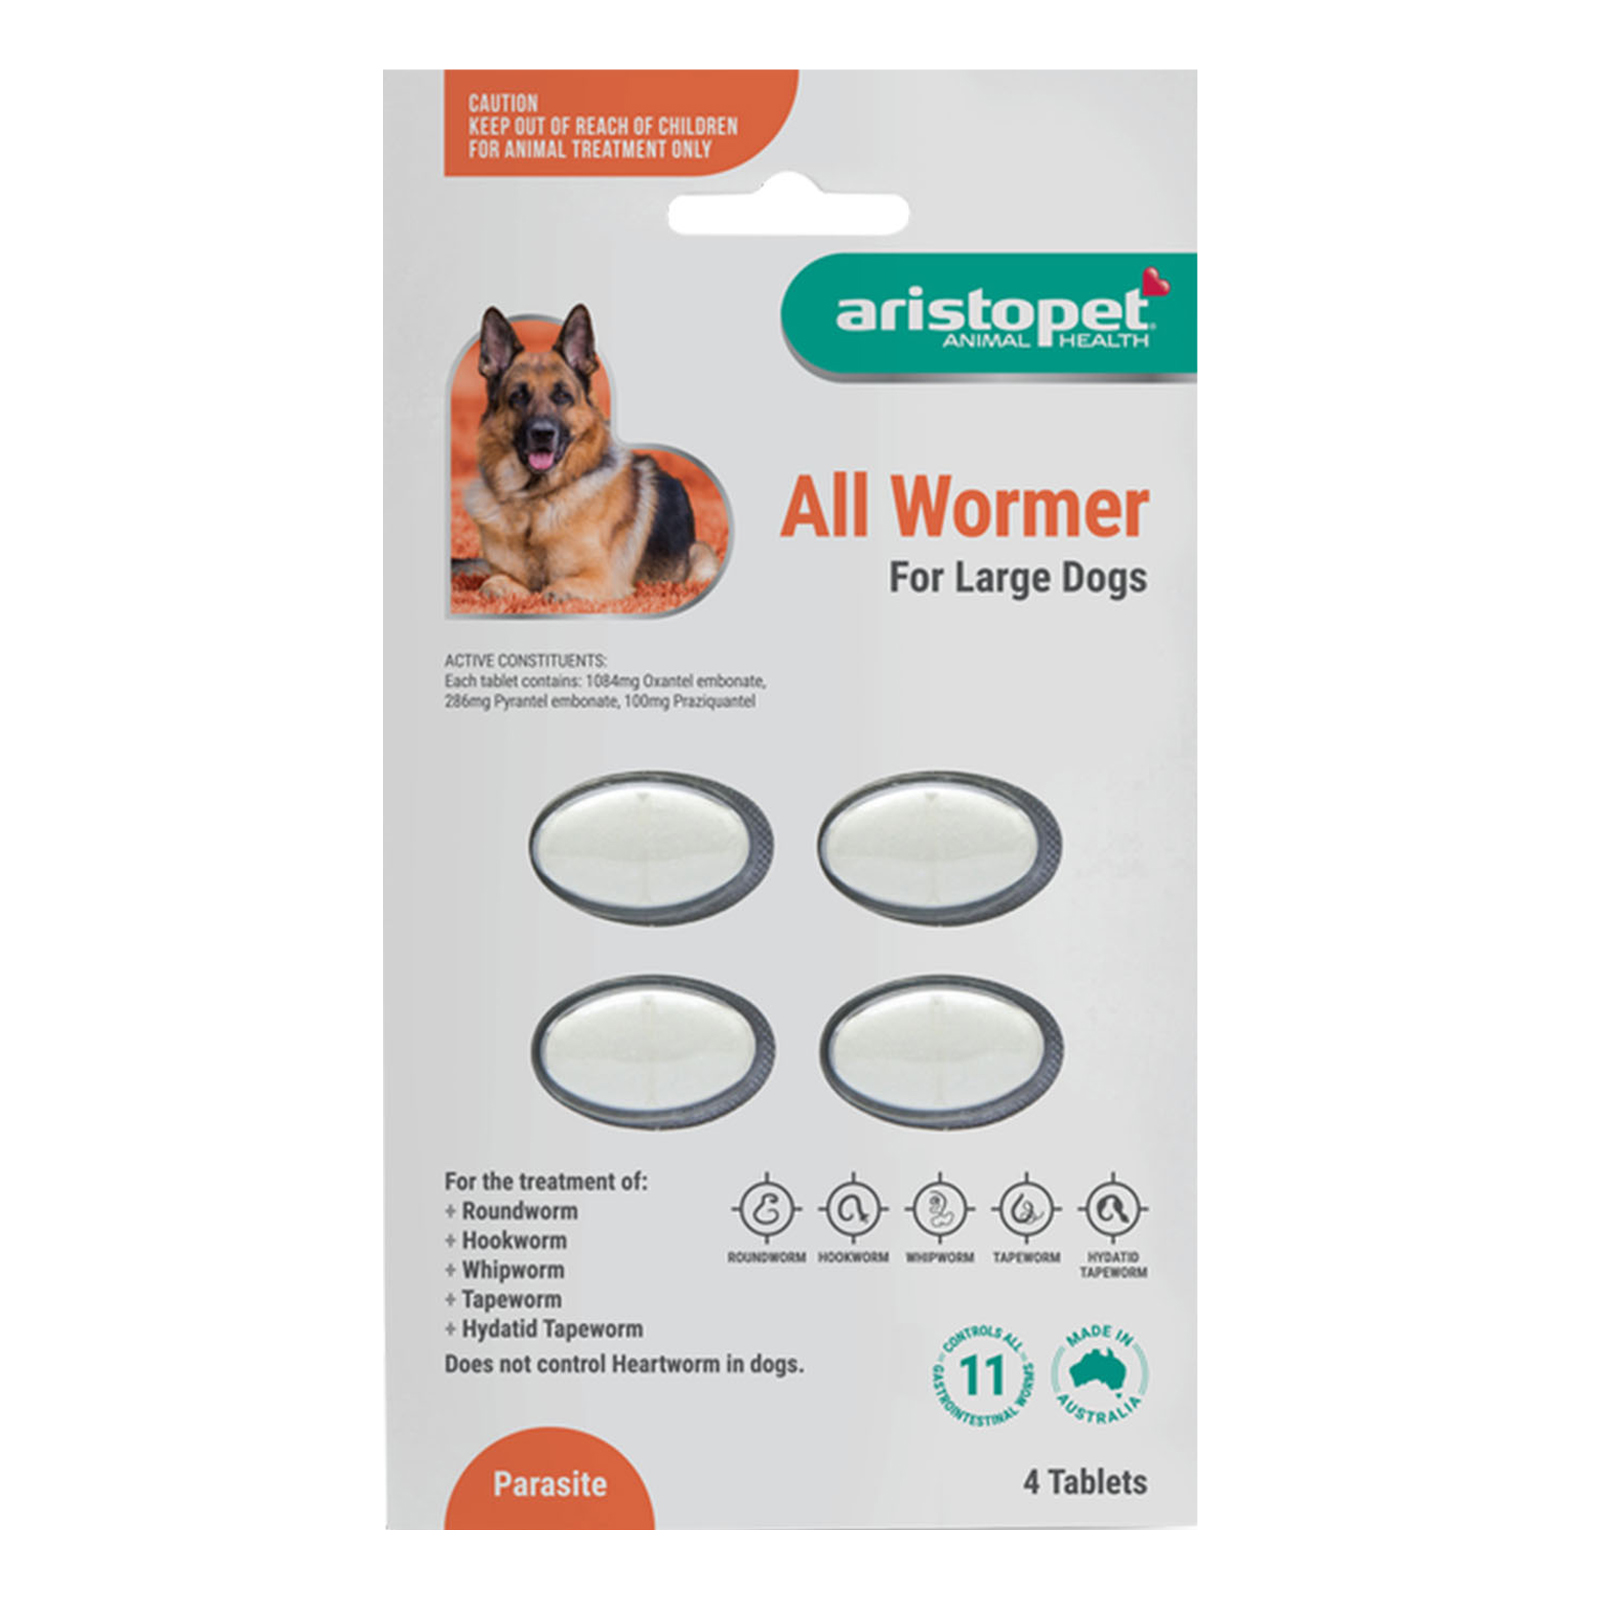 Aristopet AllWormer For Large Dogs 20 Kgs